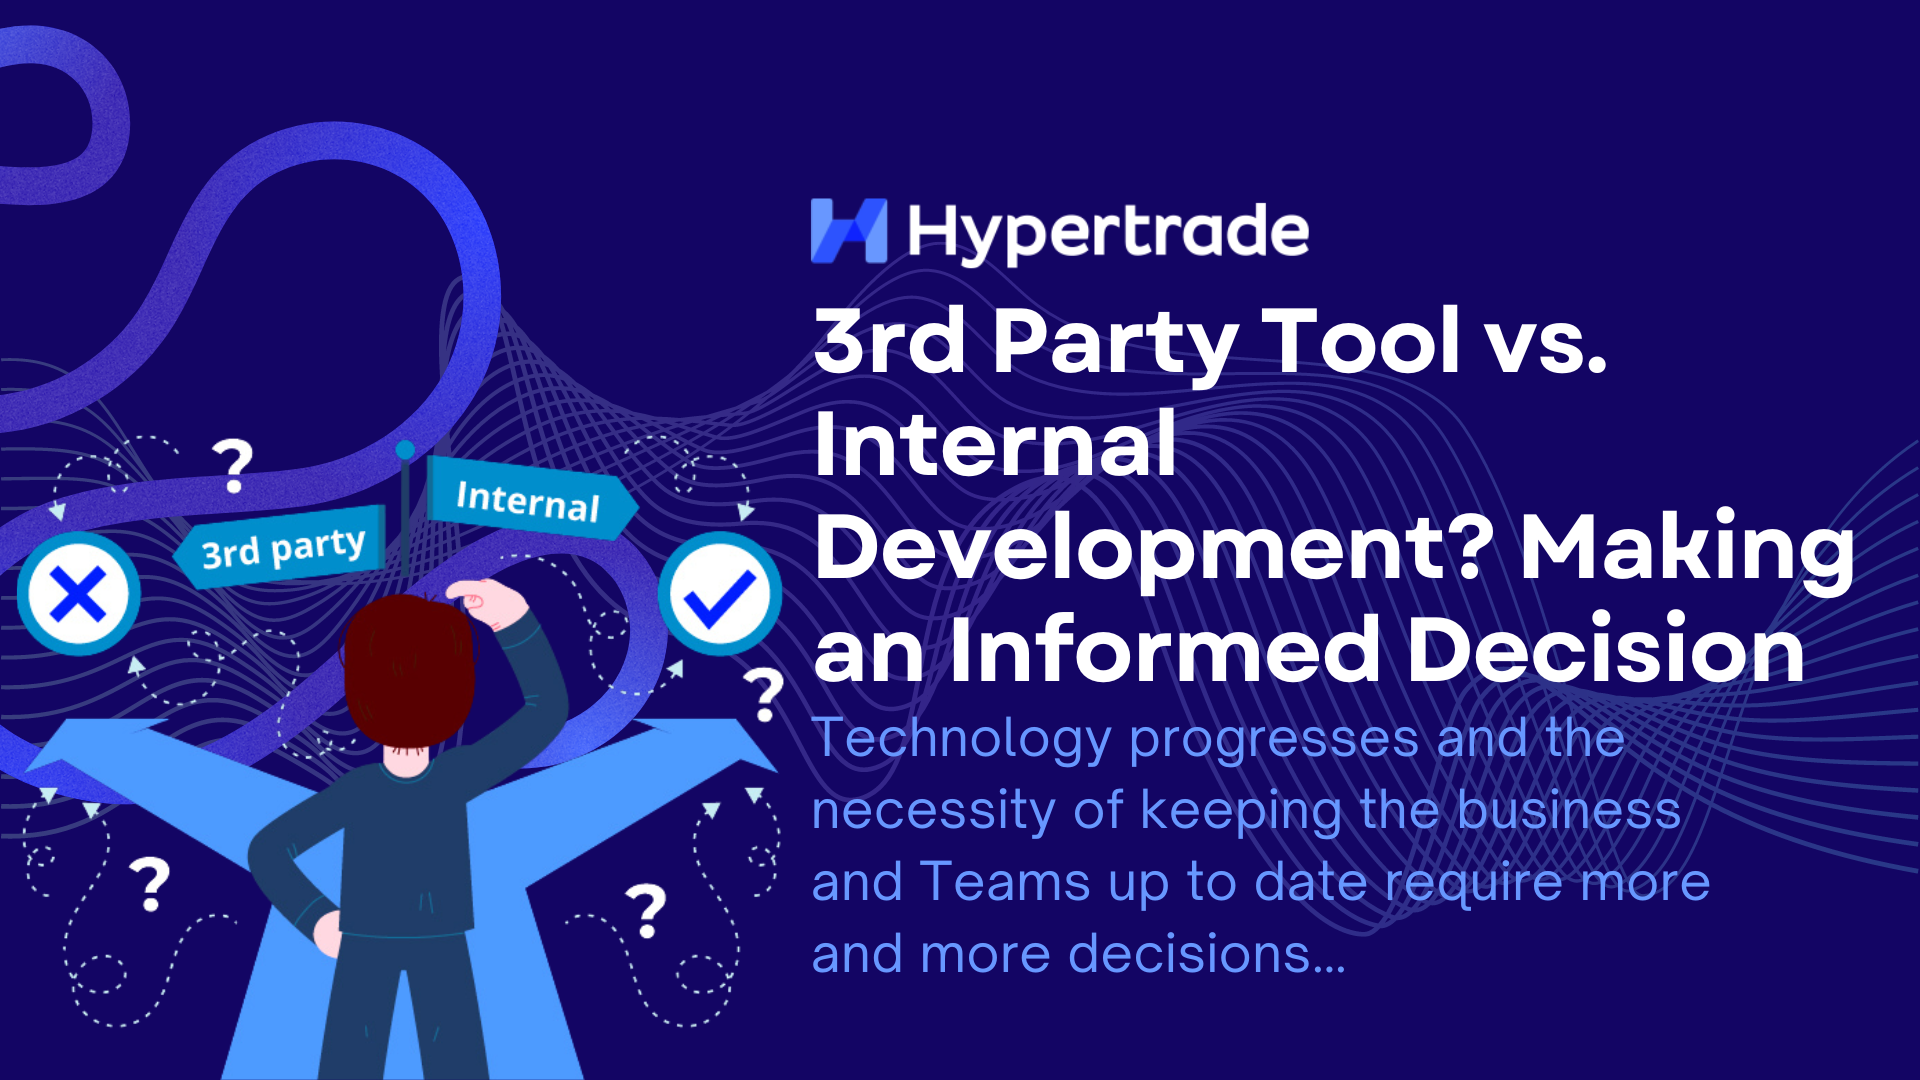 3rd Party Tool vs. Internal Development? Making an Informed Decision